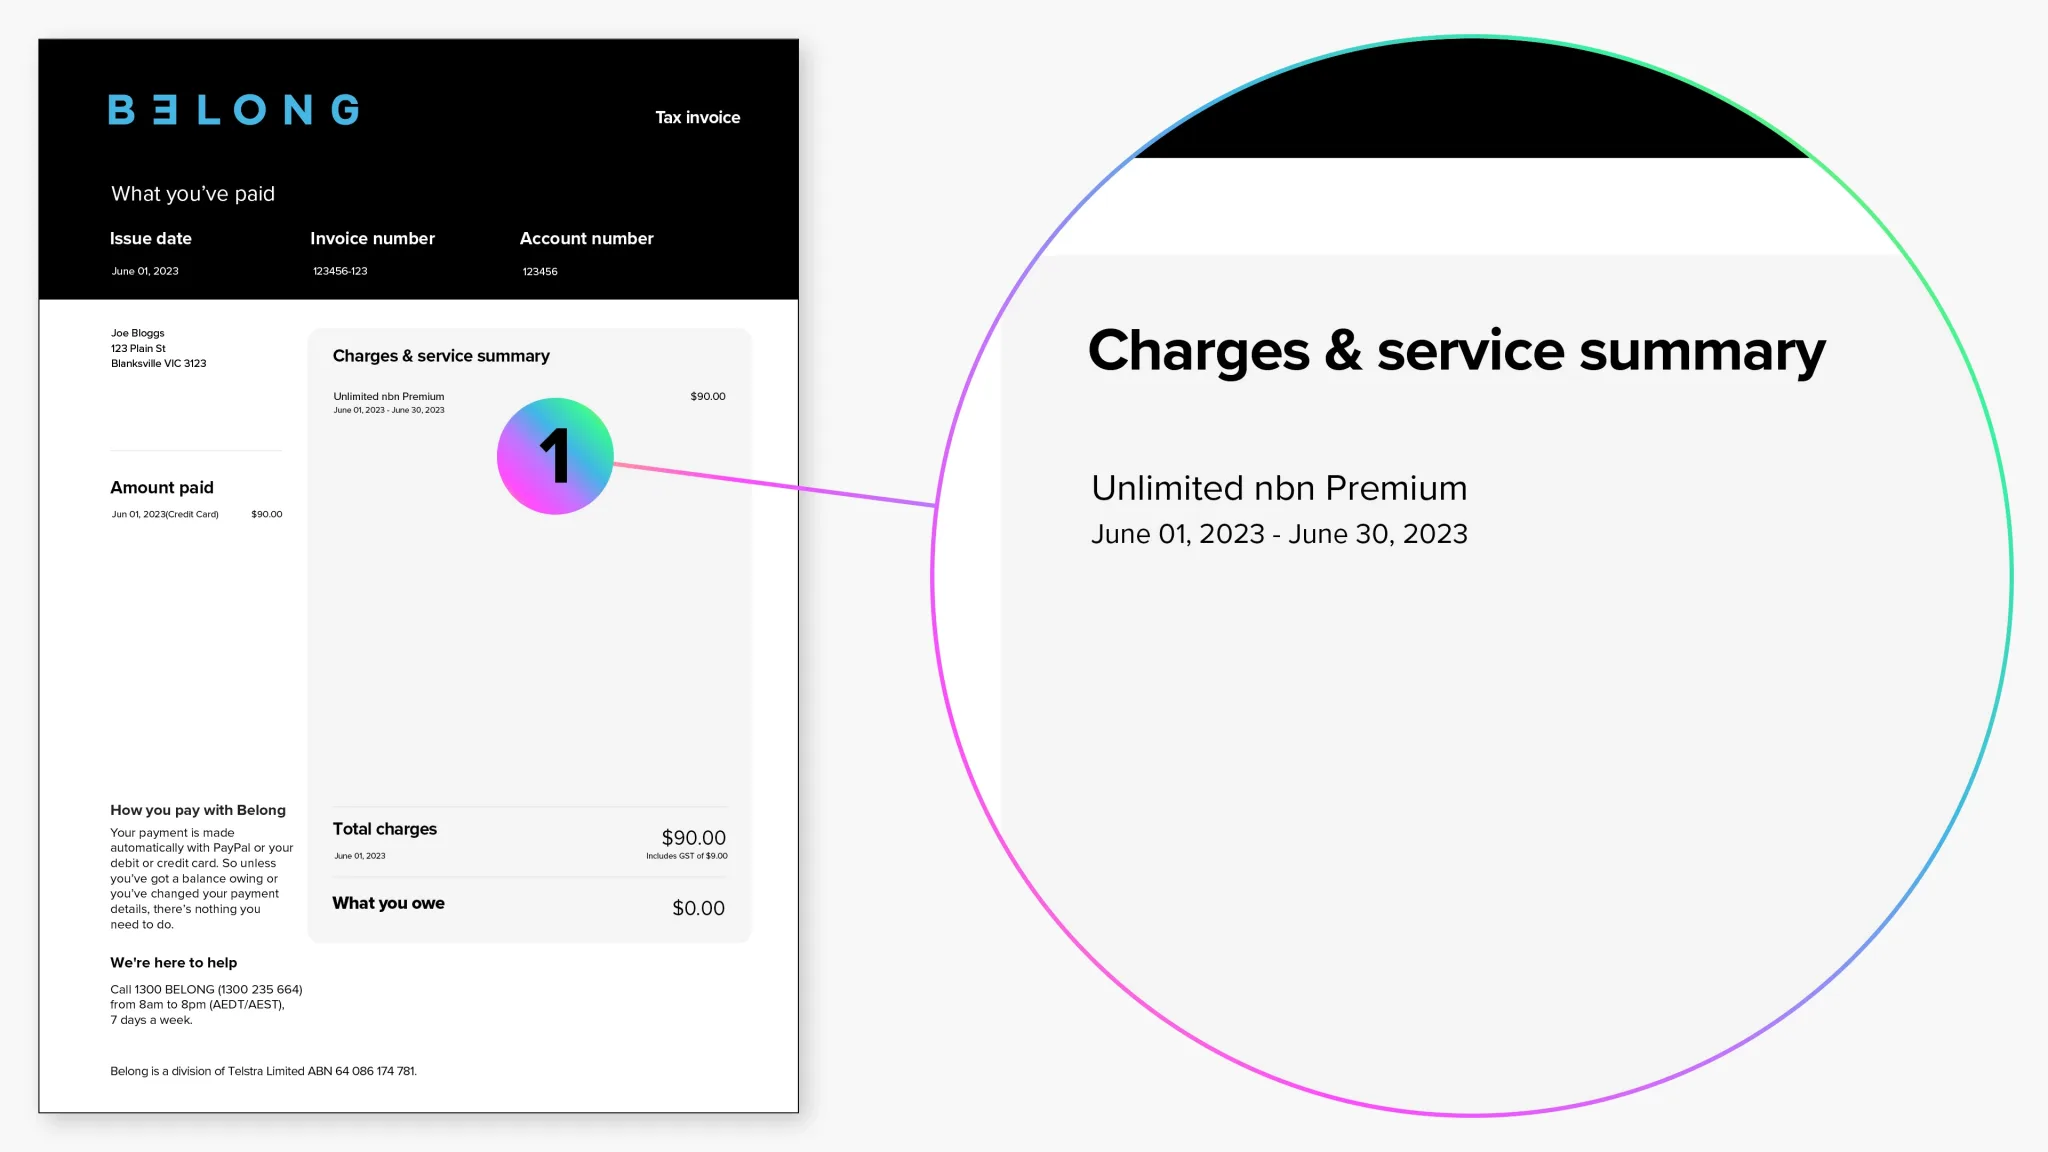 A Belong invoice zoomed in on section 1 – “Charges & service summary” – to show an 
Unlimited NBN Premium item listed as a charge.